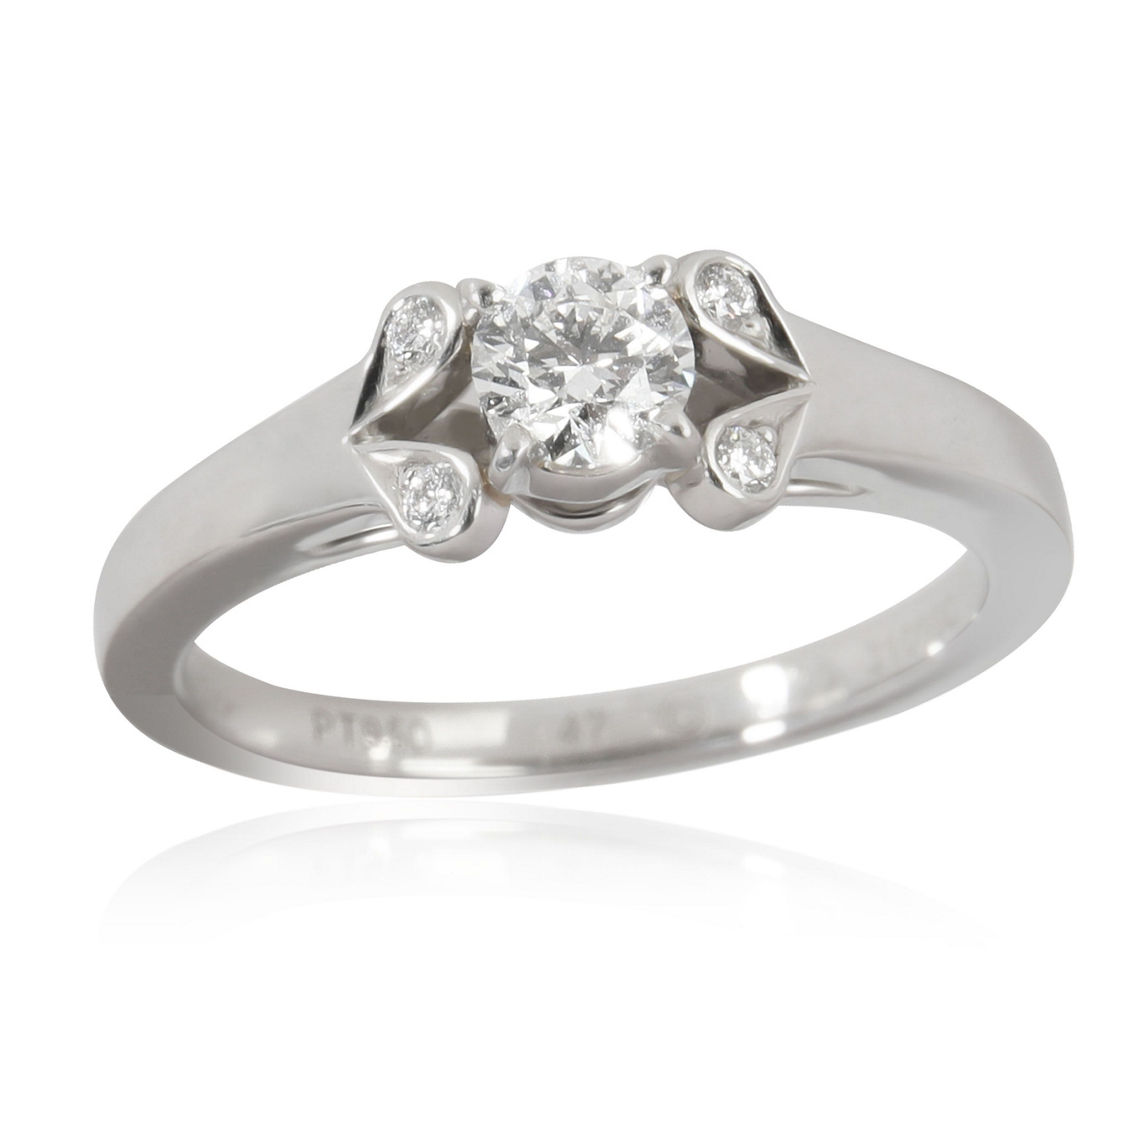 Cartier Ballerine Engagement Ring Pre-Owned - Image 3 of 3